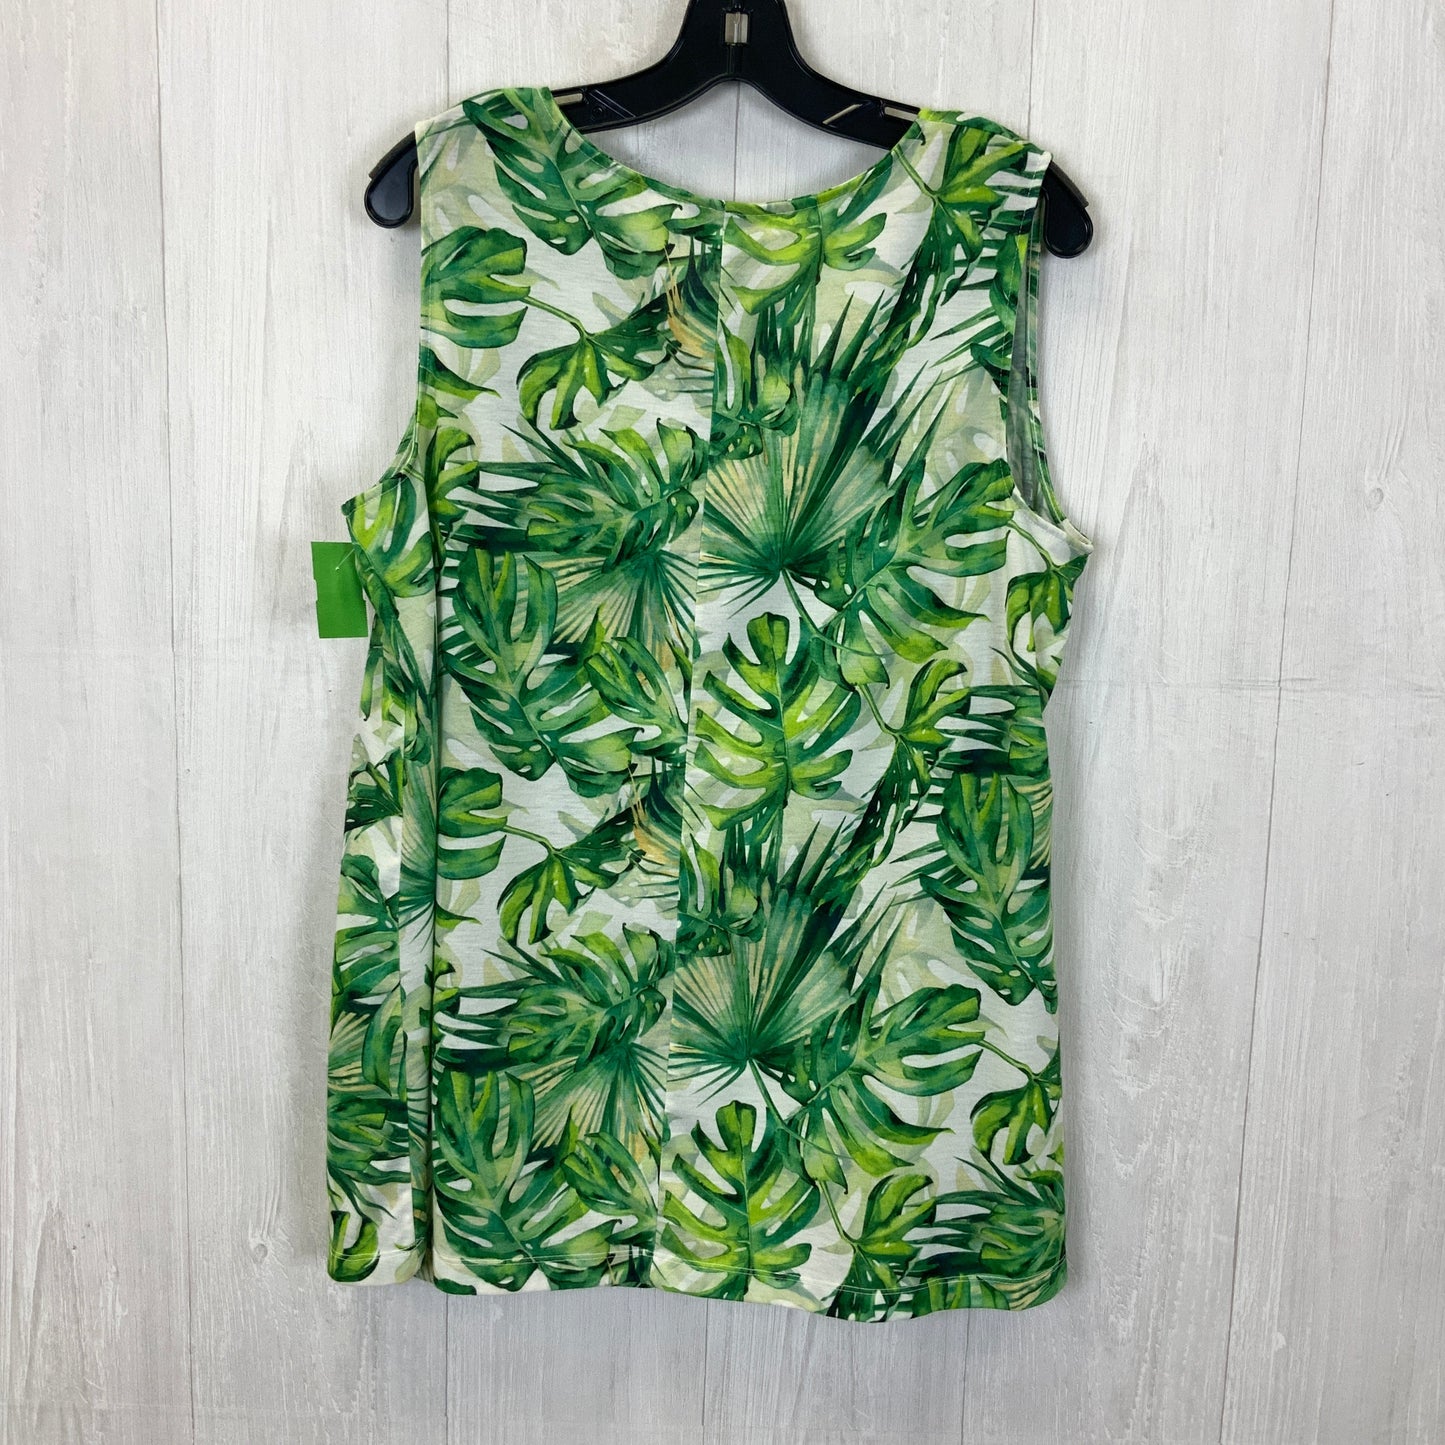 Tropical Print Top Sleeveless Catherines, Size 1x